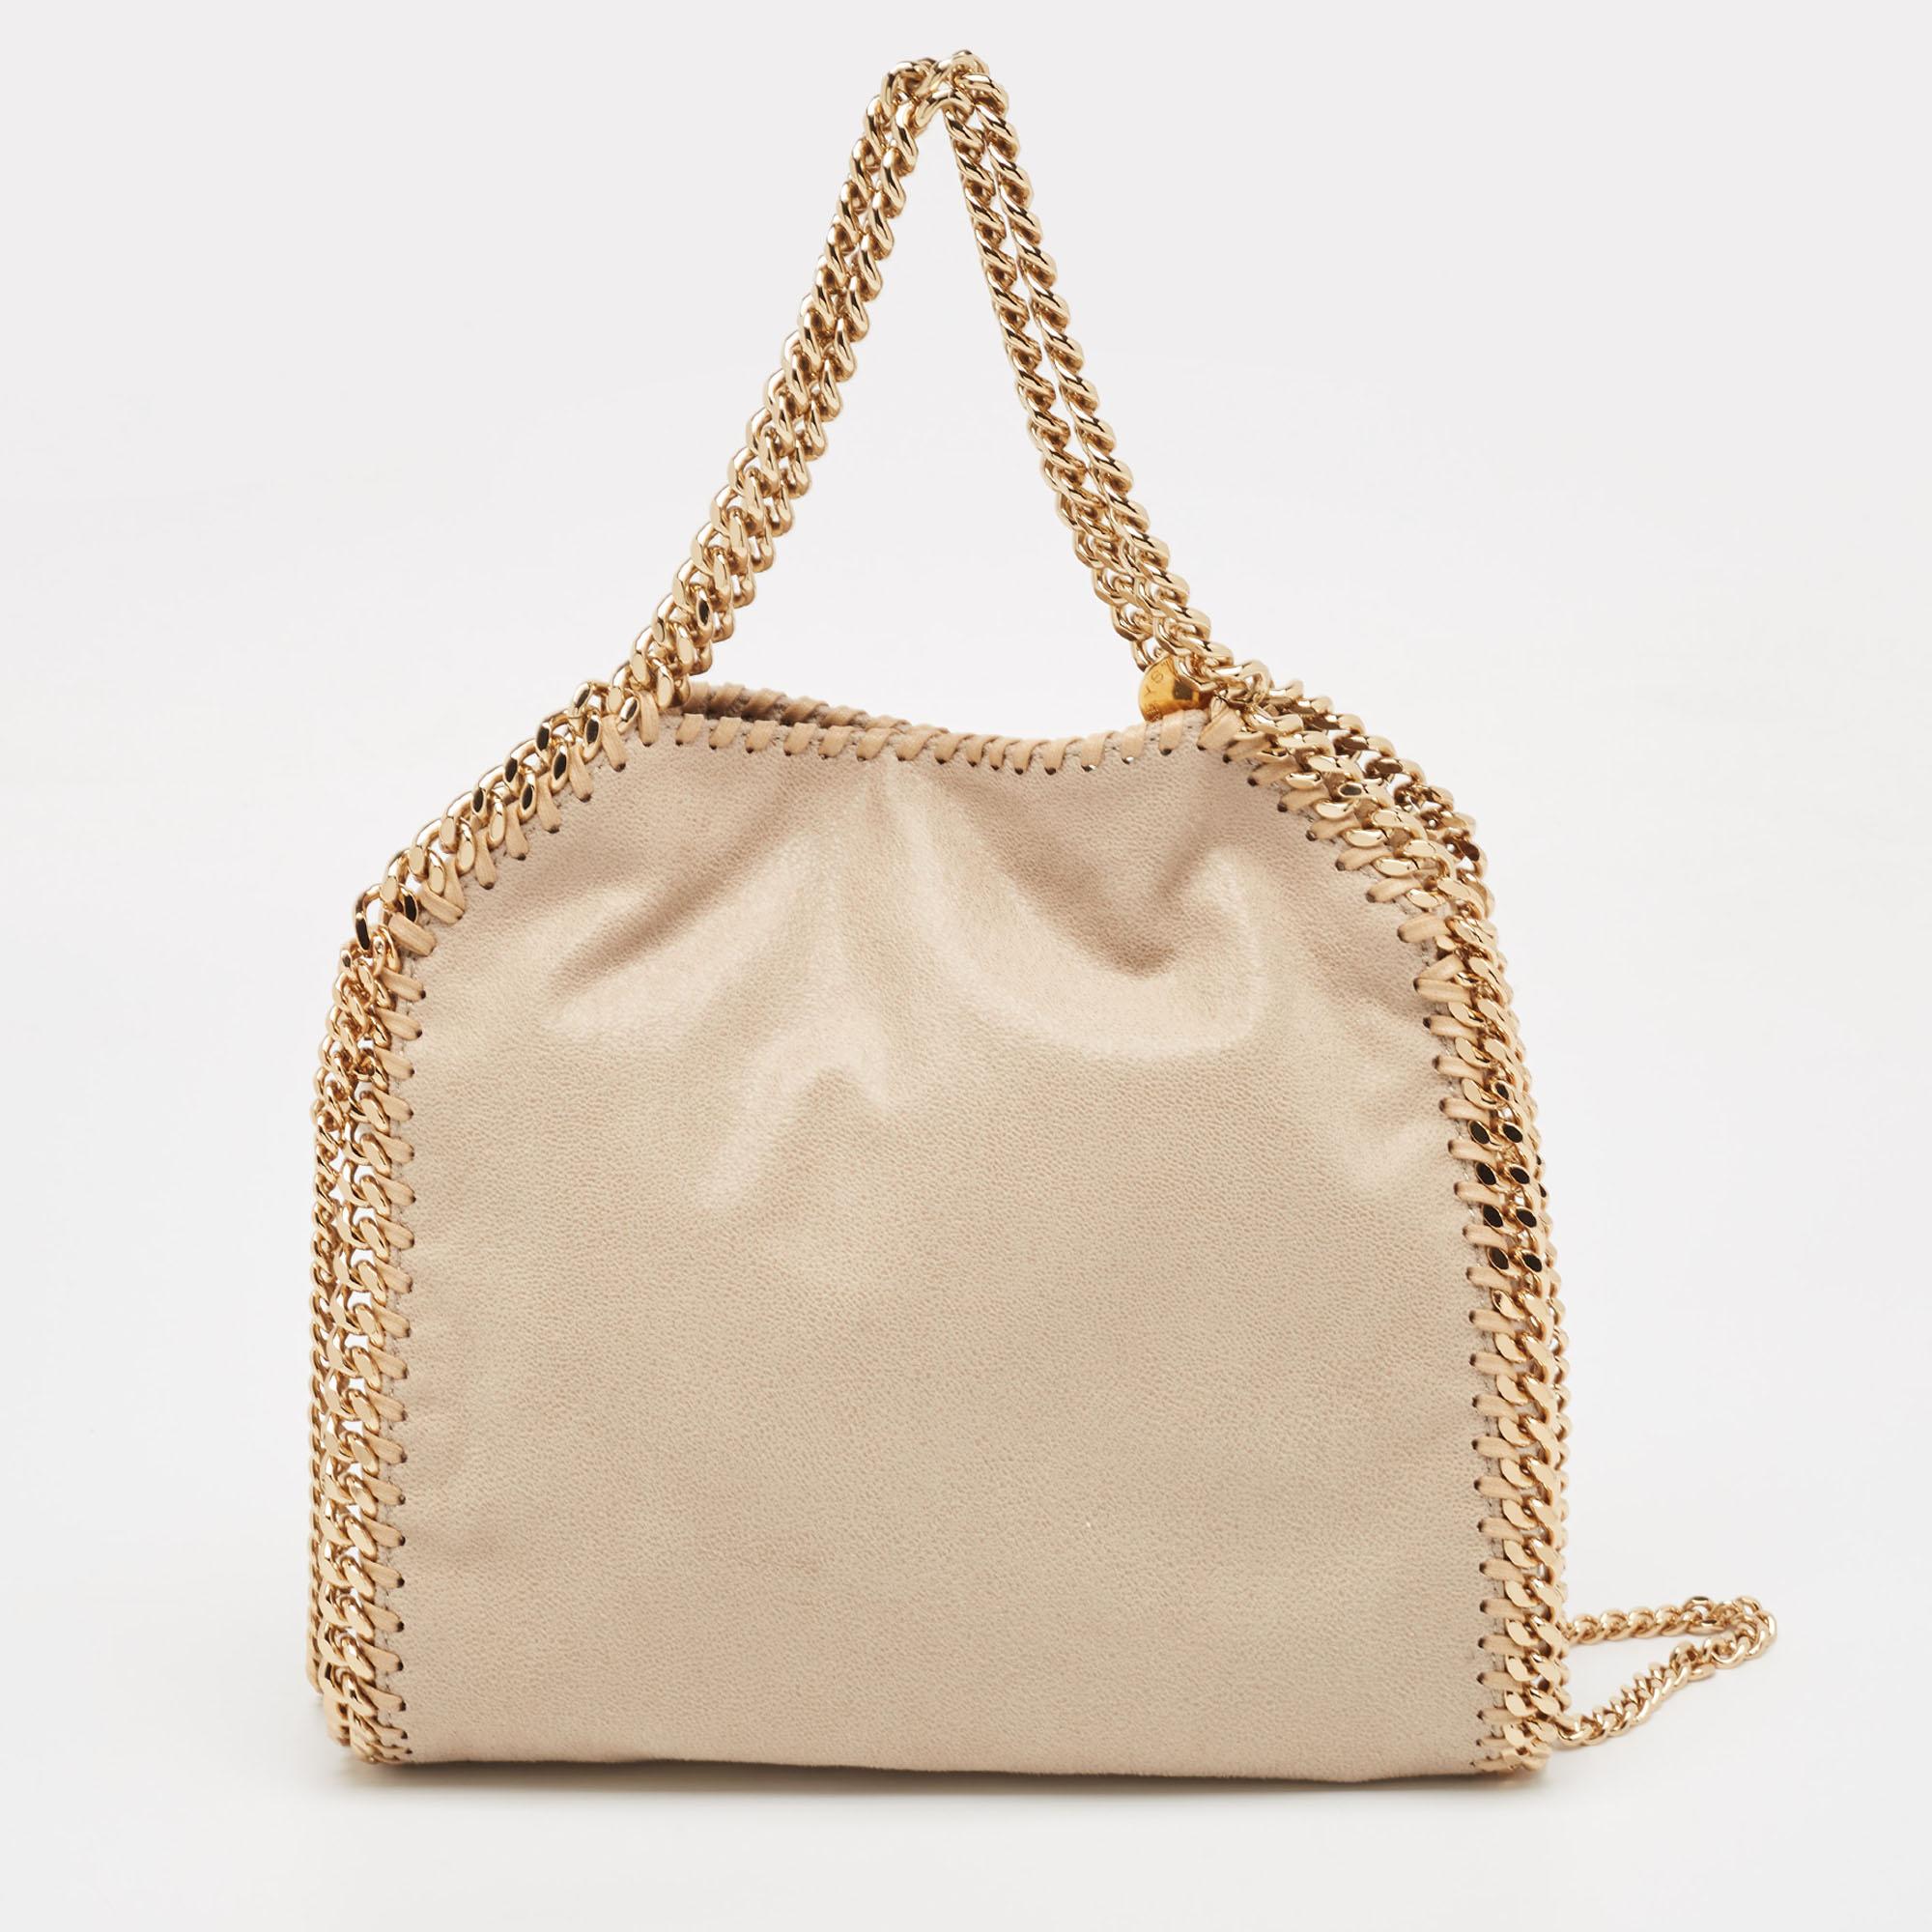 Created from high-quality materials, this Stella McCartney Falabella tote is enriched with functional and classic elements. It can be carried around conveniently, and its interior is perfectly sized to keep your belongings with ease.

Includes: Info